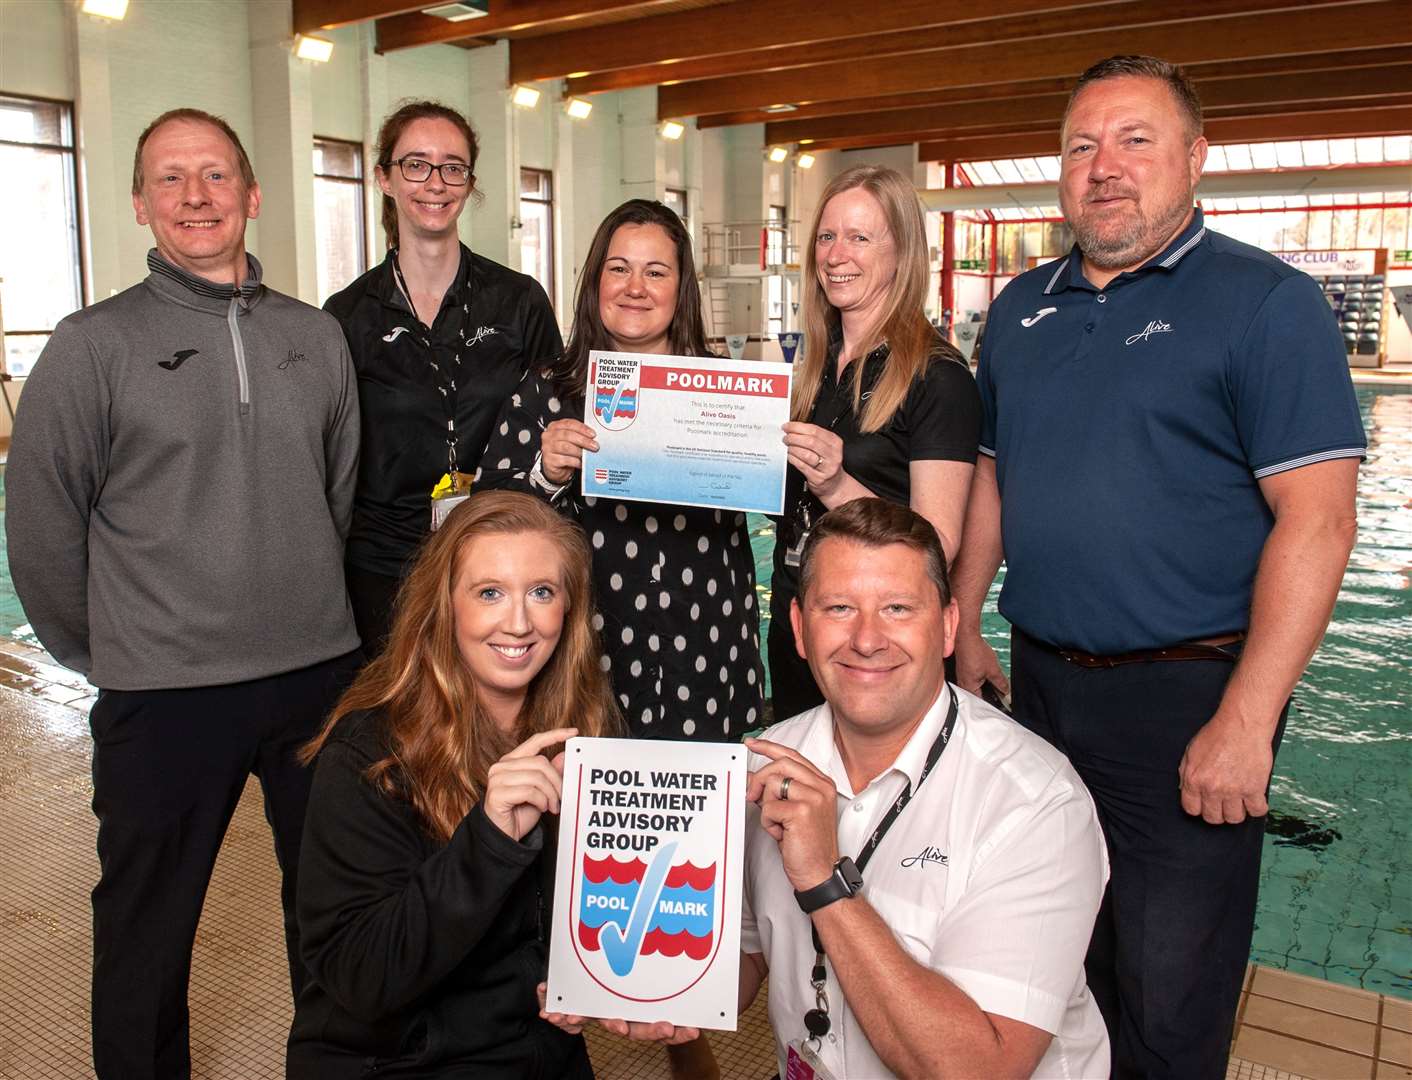 Three Alive West Norfolk pools are the first in Norfolk to be accredited with Poolmark. Pictured are Neil Gromett, Dave Cleland, Louise Biggs, Siobhan Cleeve, Jon Bunting, Mair Morton and Cathryn Hancock at Lynn's St James Swimming Pool